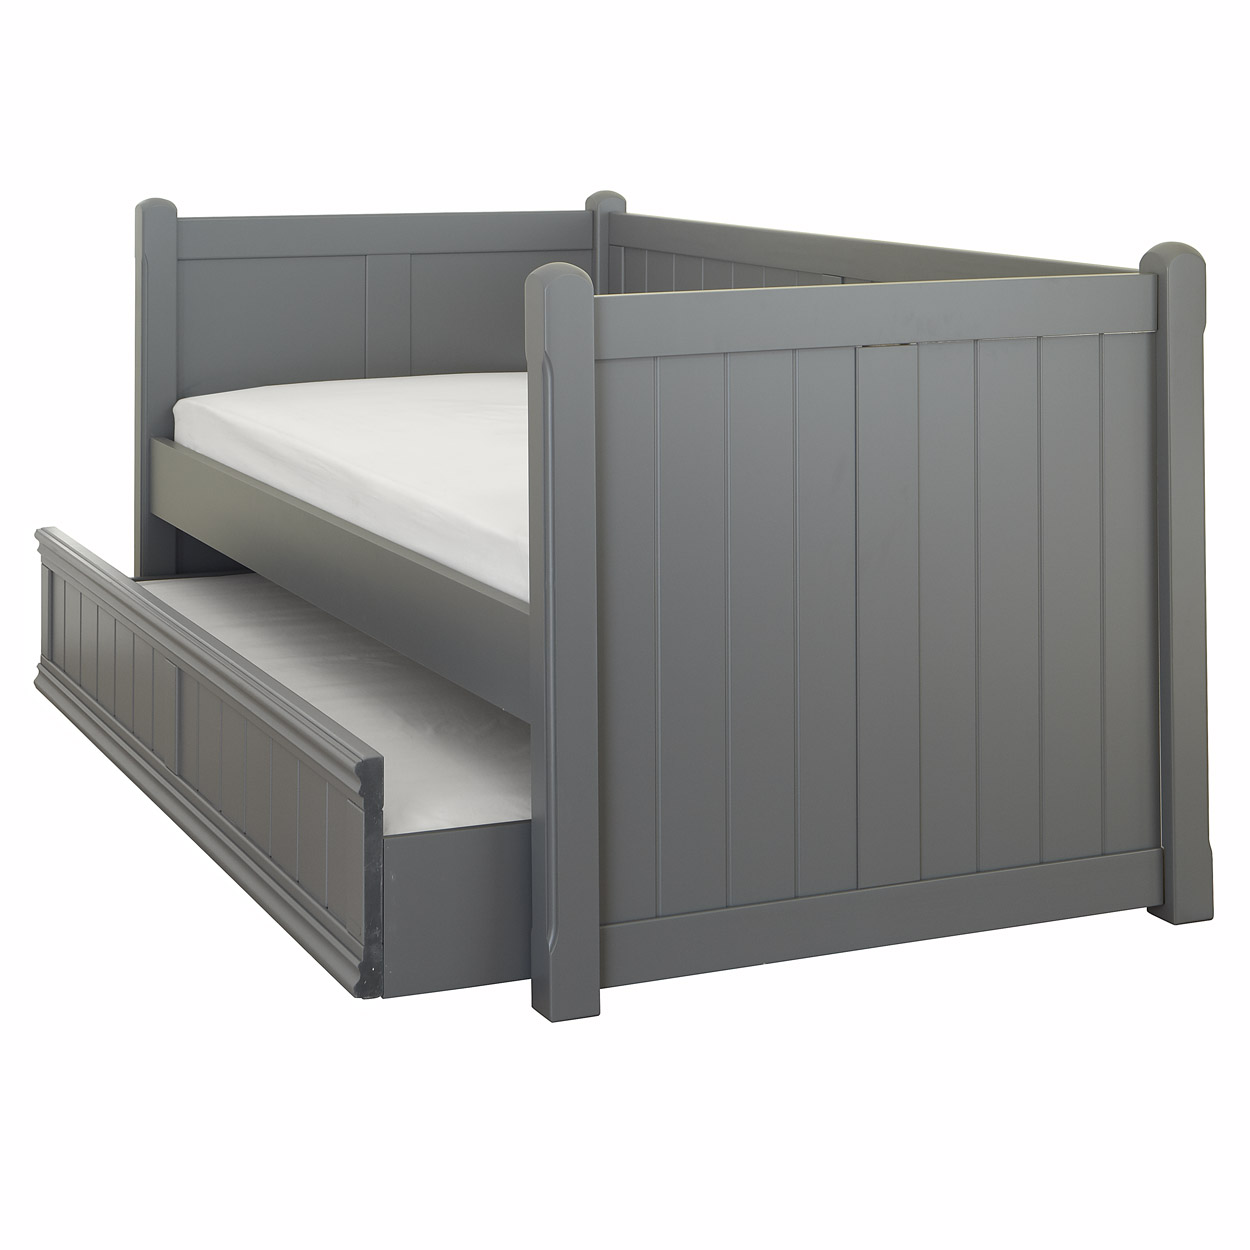 Charterhouse Daybed With Trundle - Dark Grey